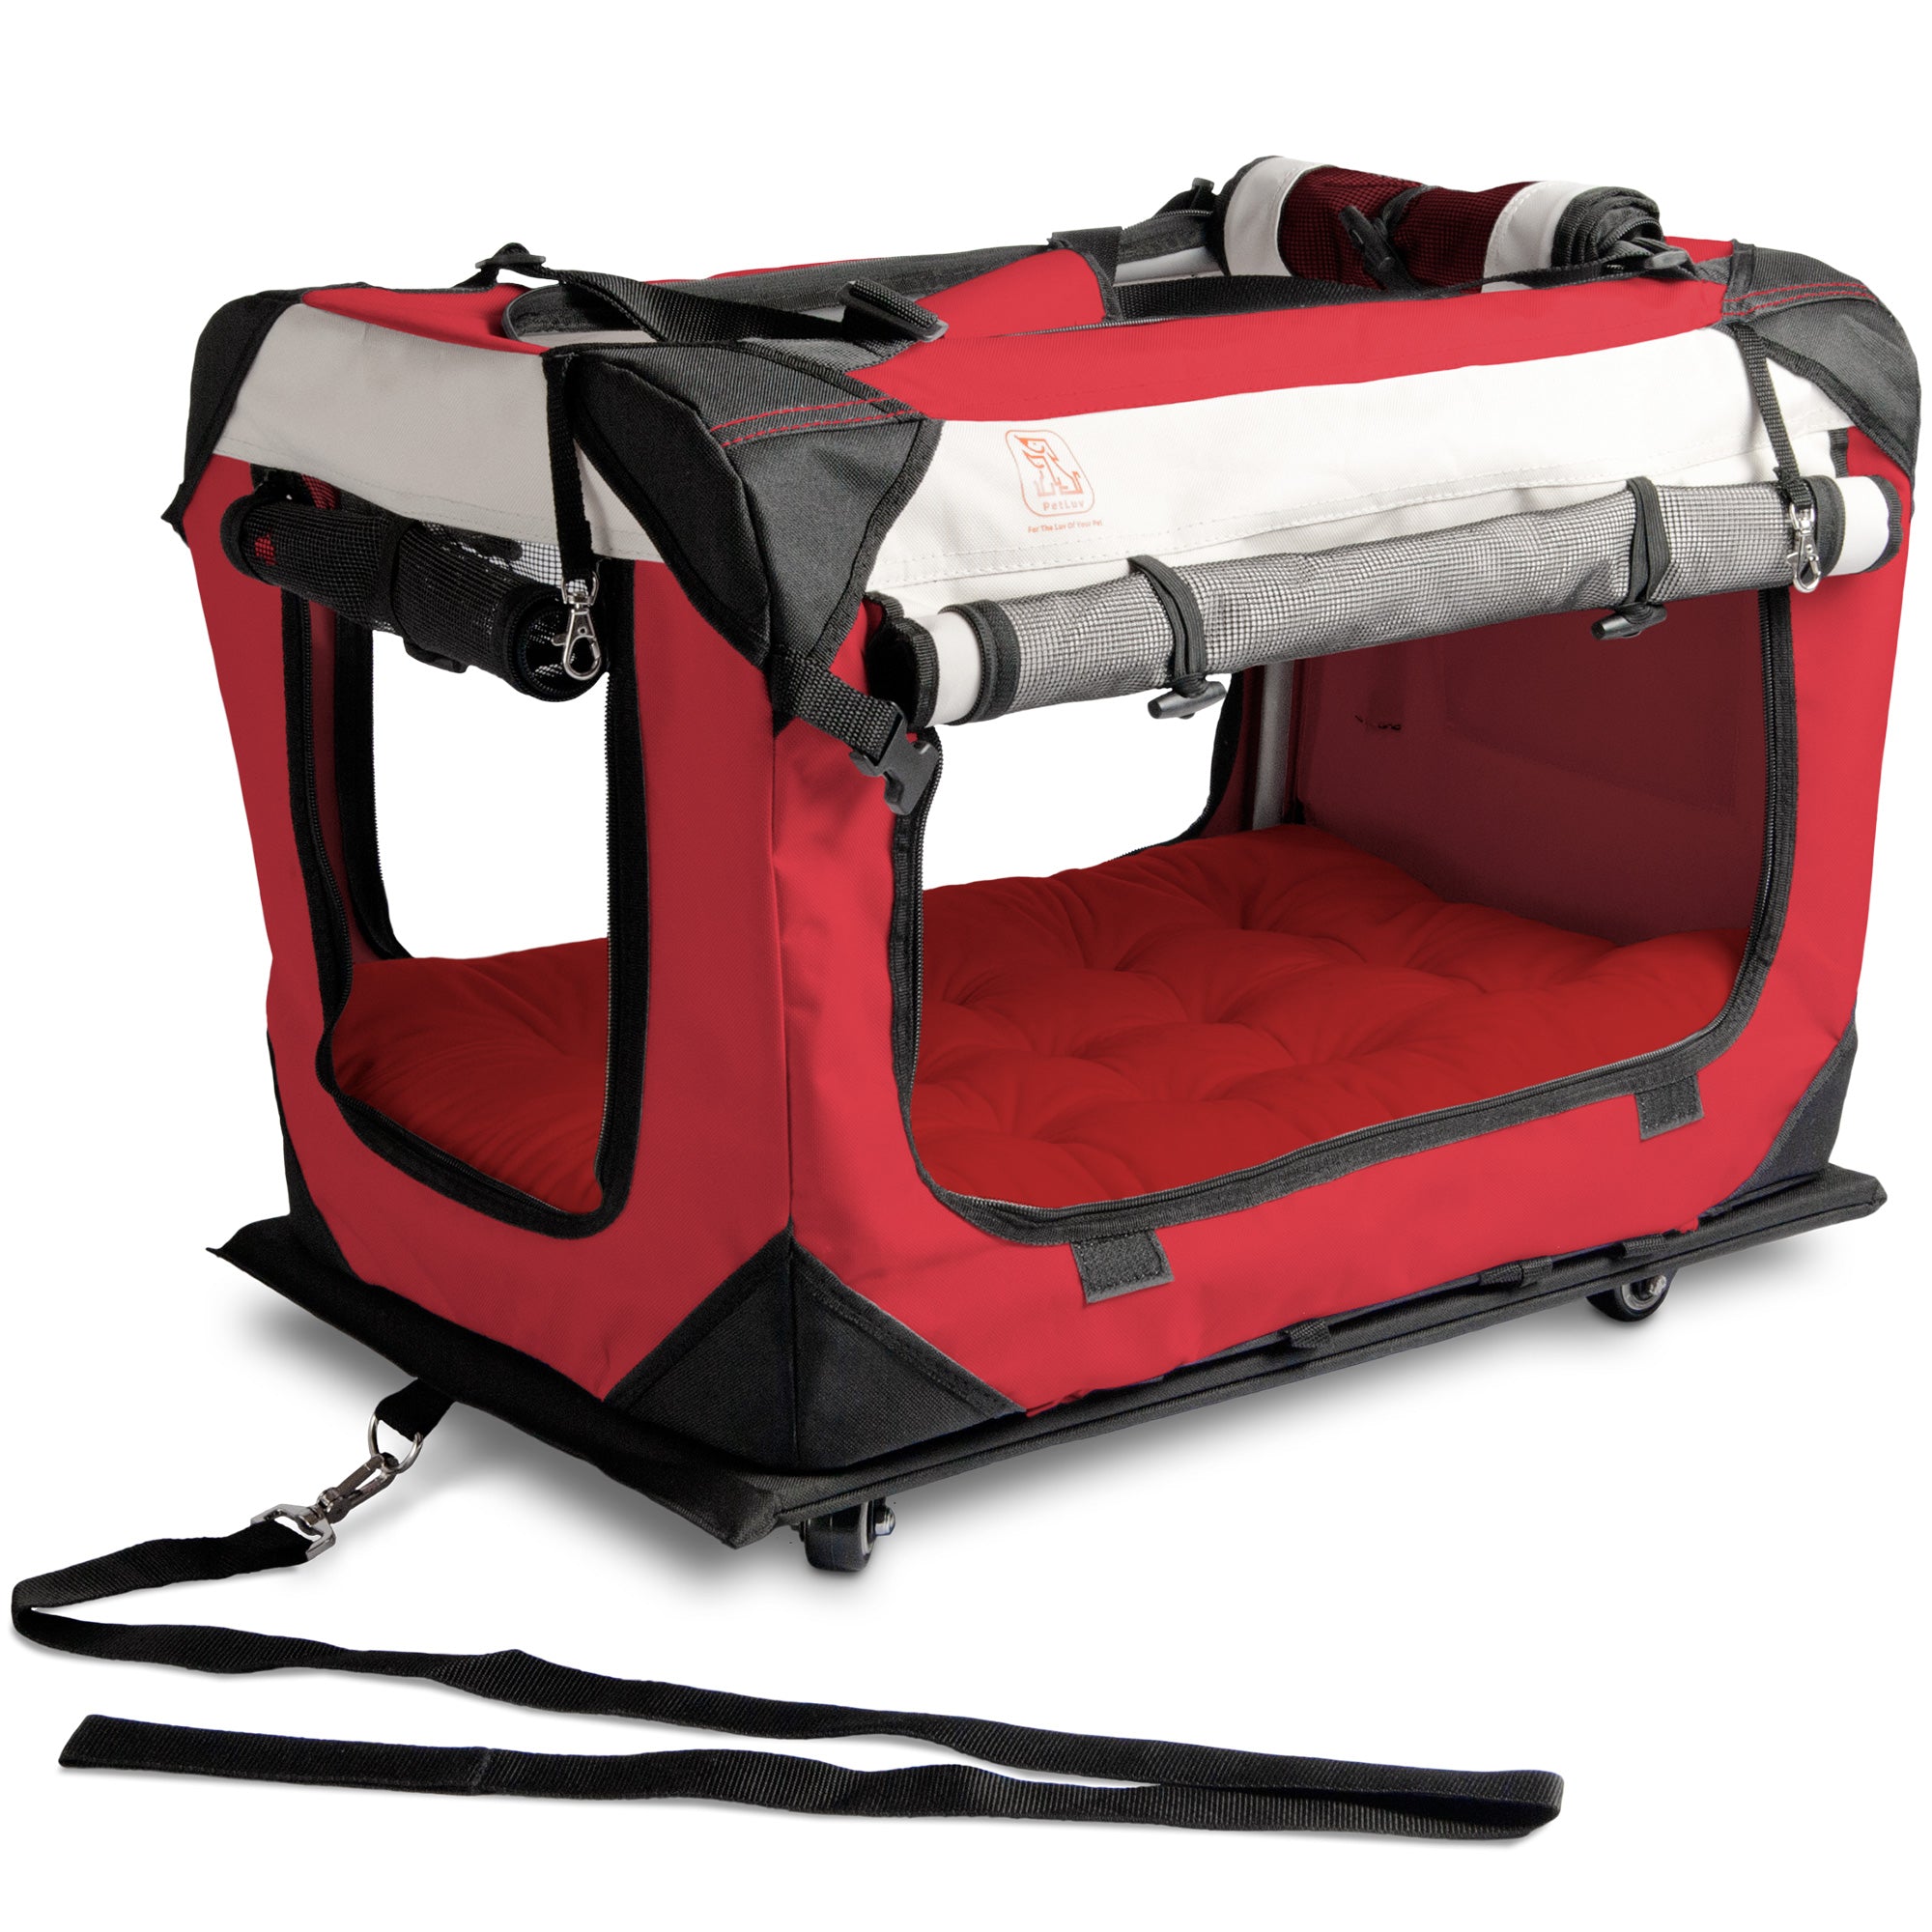 PetLuv Pull-Along Rolling Cat & Dog Carrier & Travel Crate